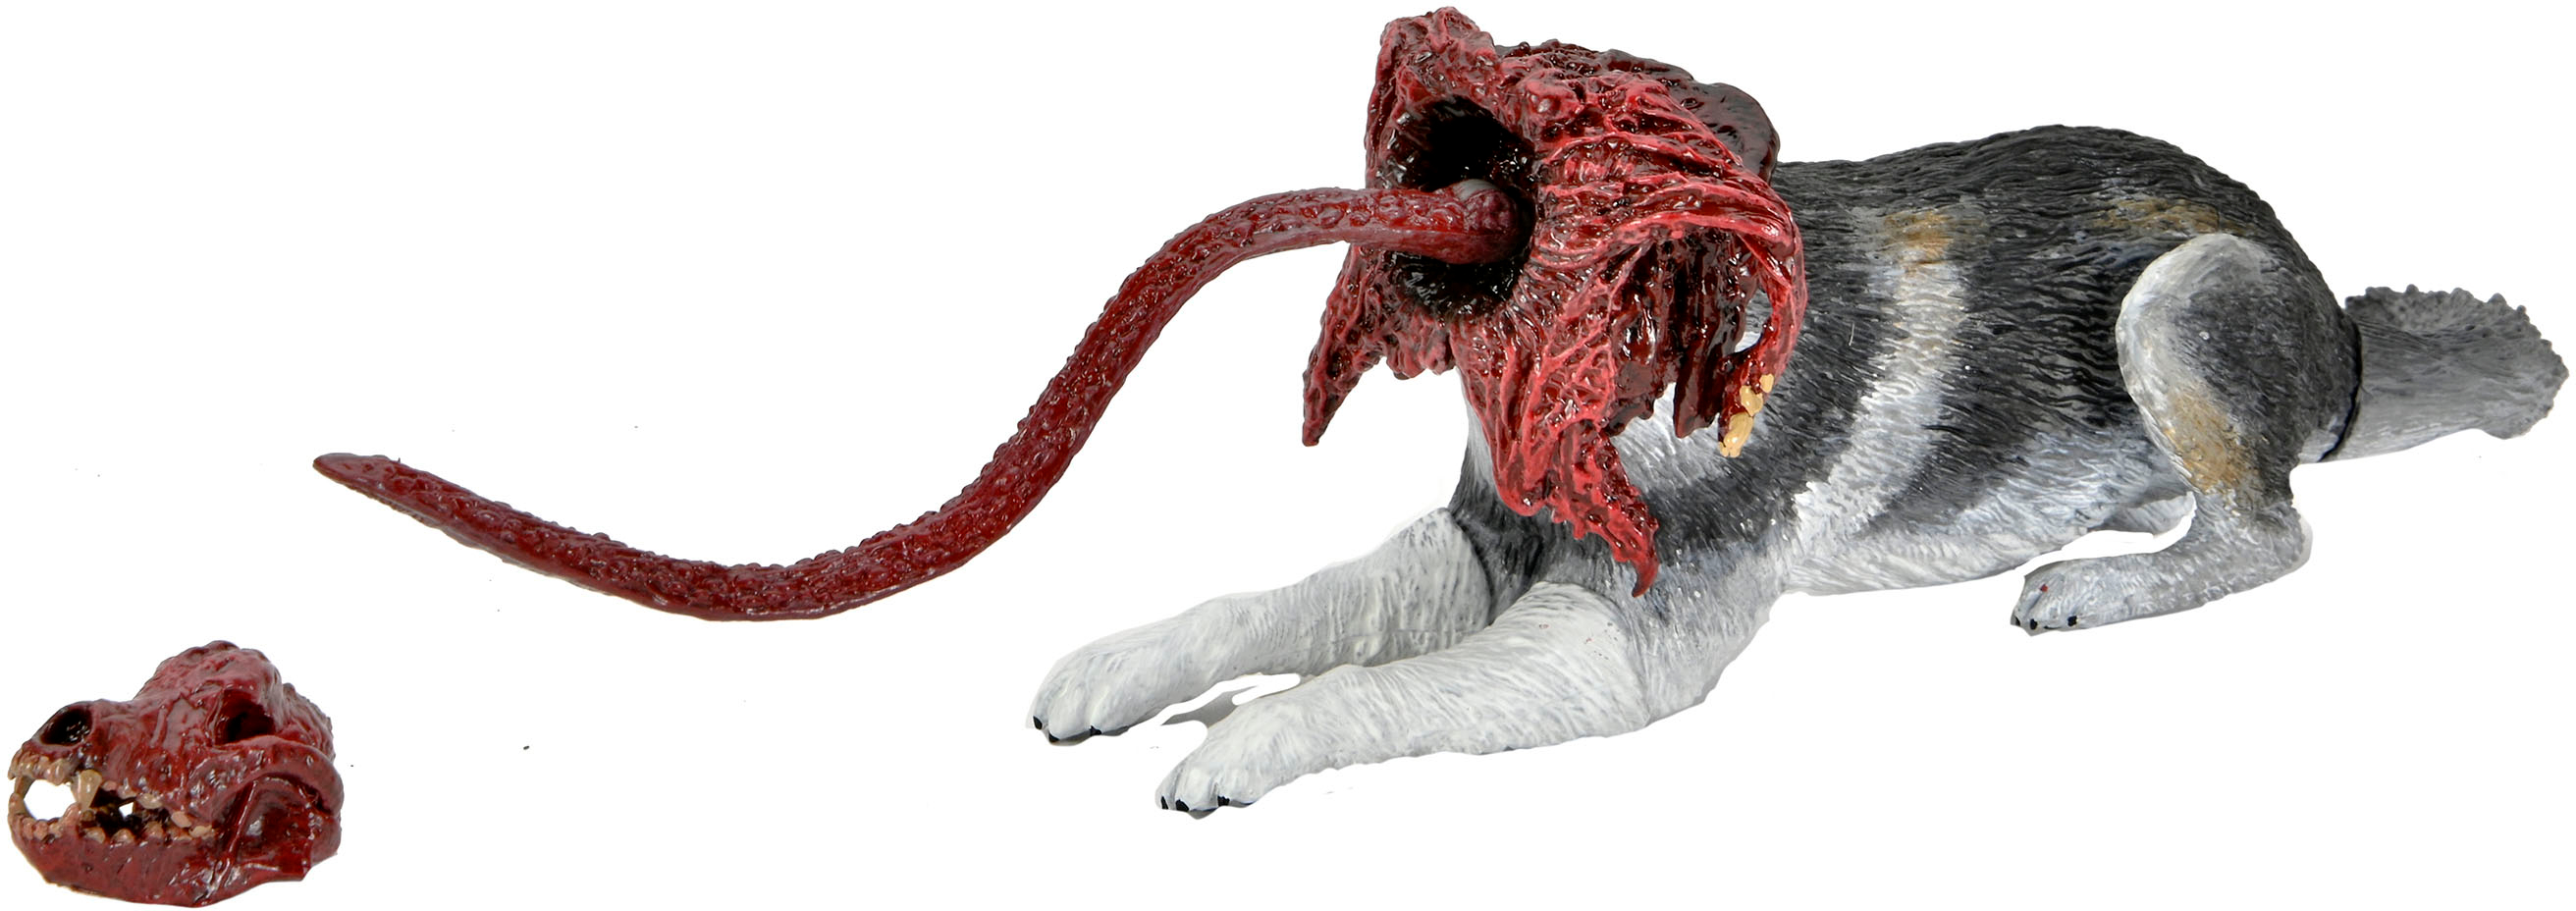 The Thing Ultimate Dog Creature Deluxe 7 in Scale Action Figure